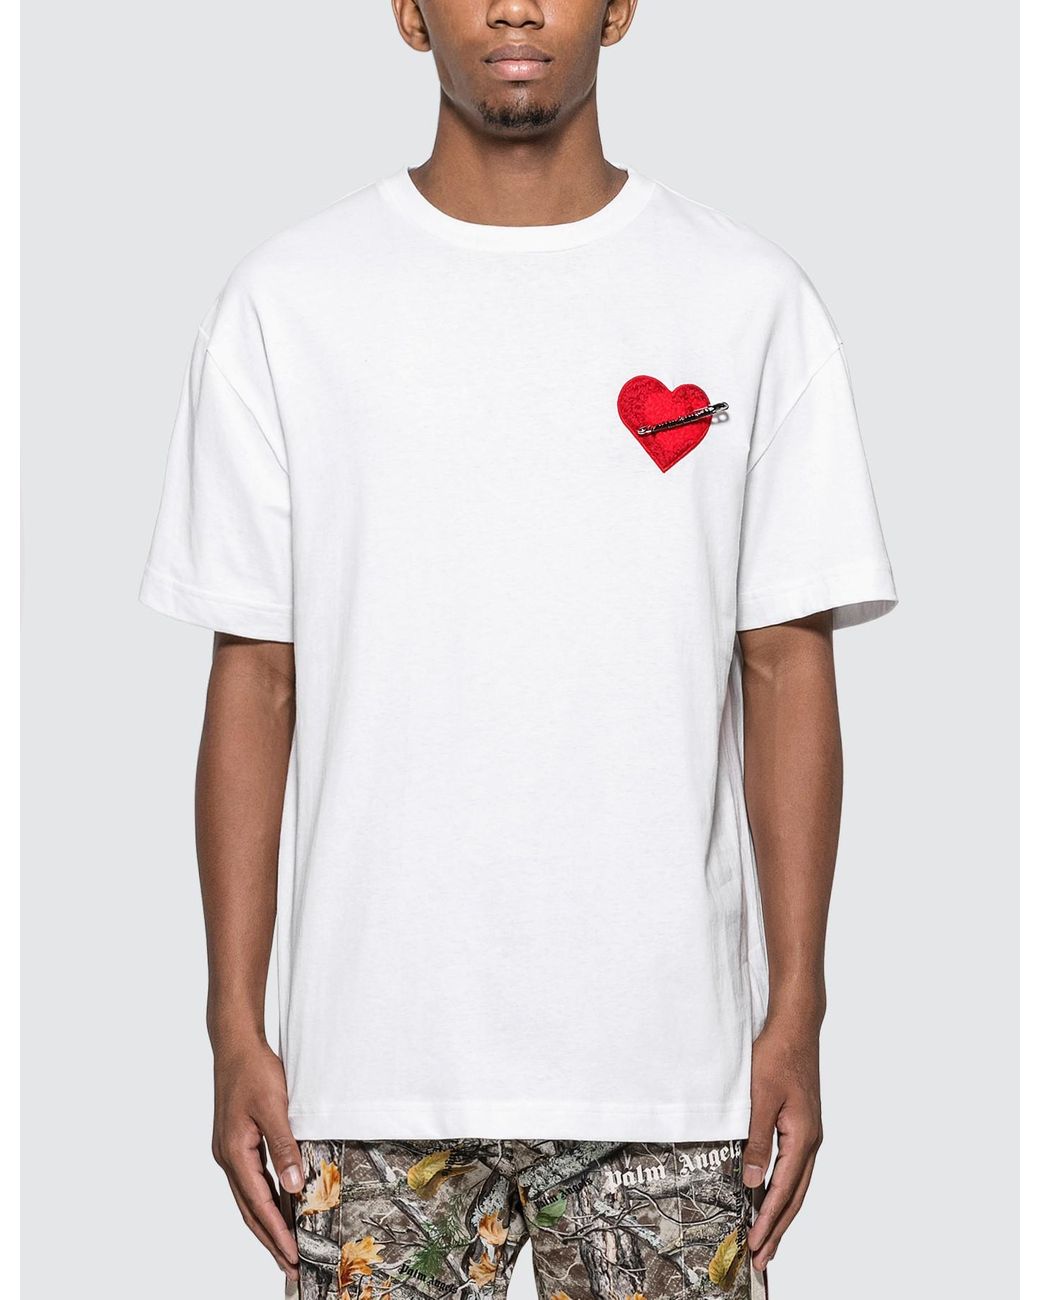 Palm Angels Cotton Pin My Heart T-shirt in White for Men - Lyst